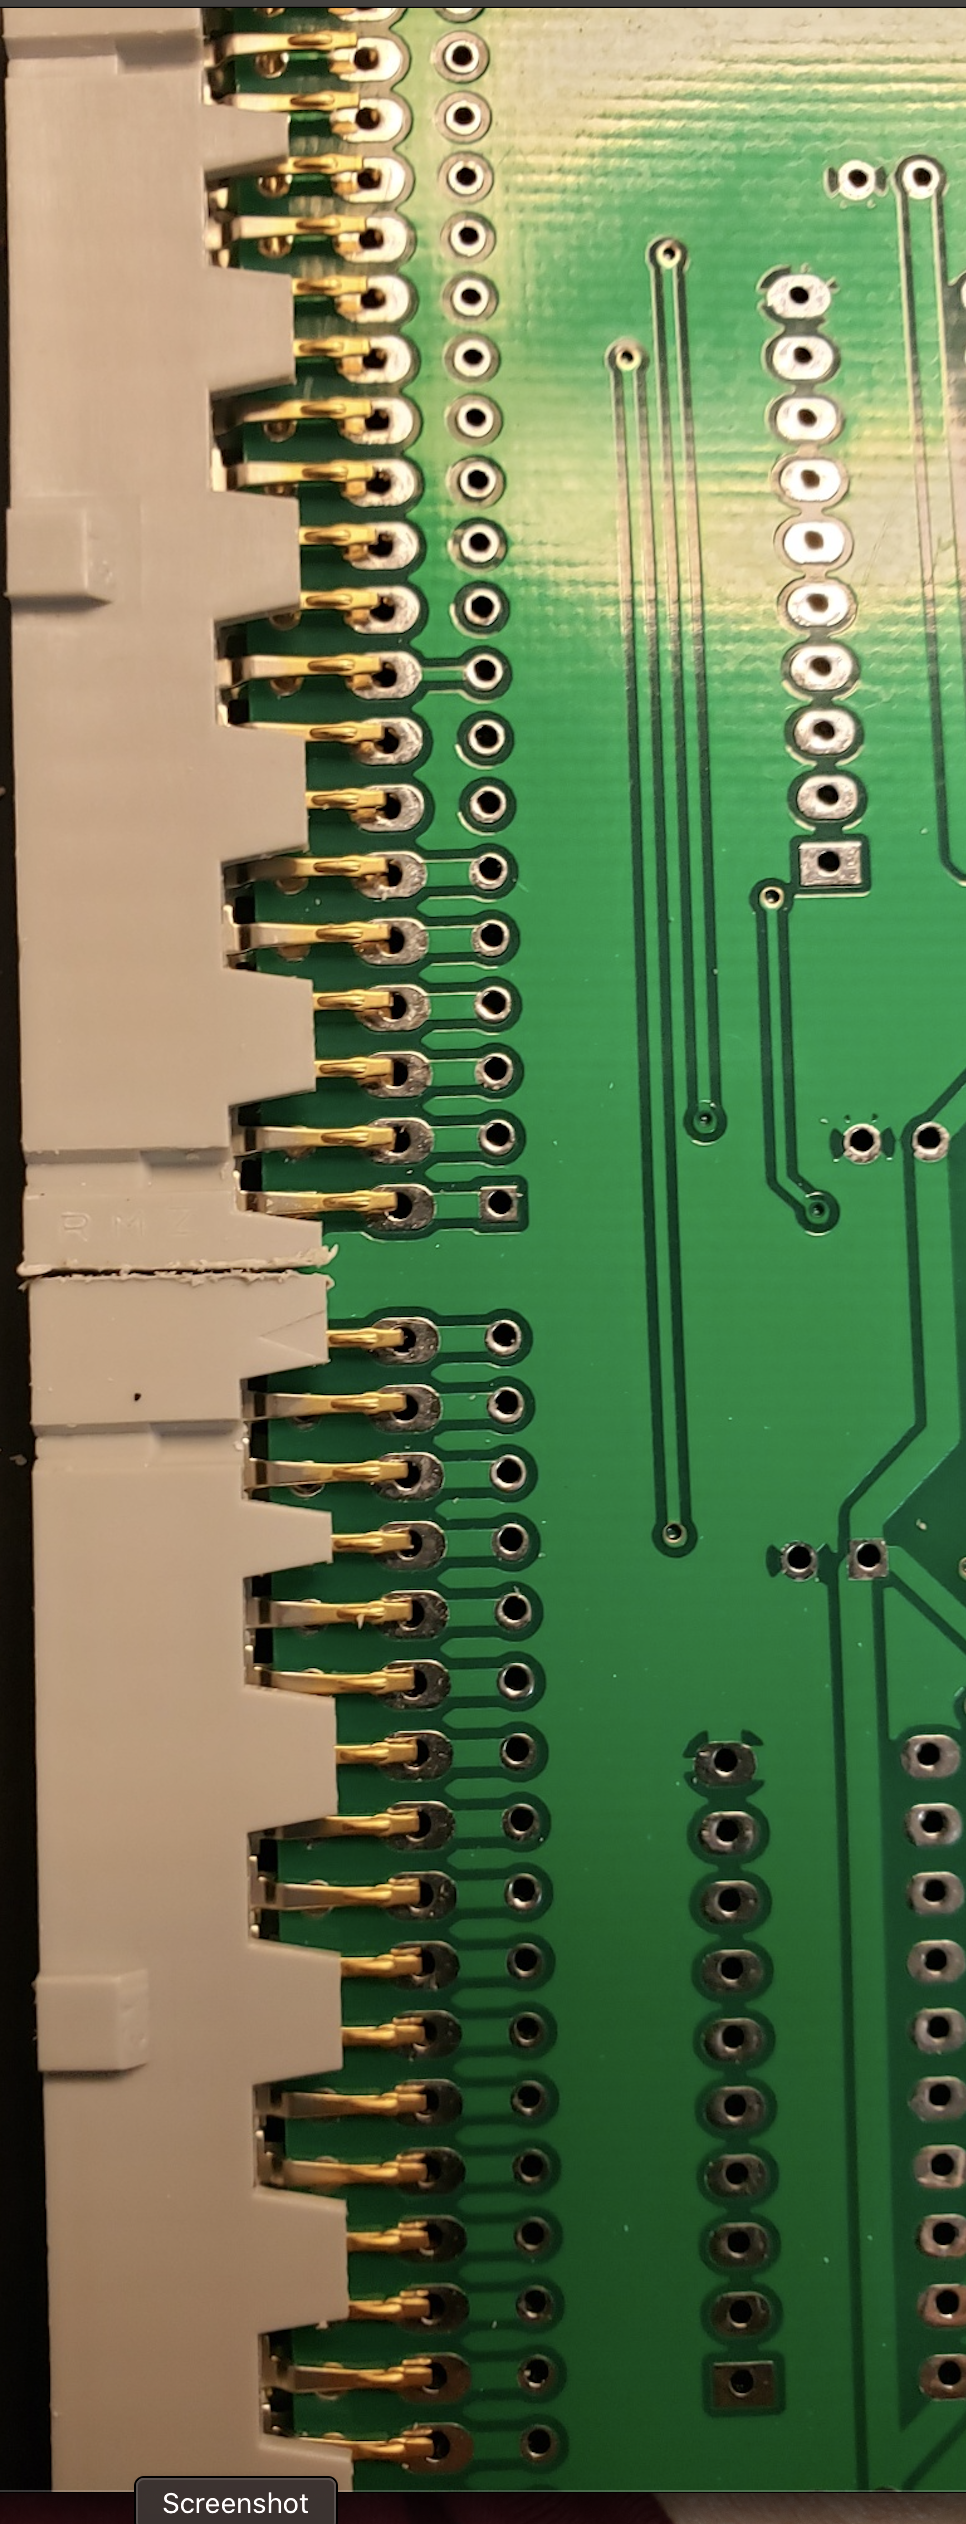 A close-up of a circuit board

Description automatically generated with medium confidence